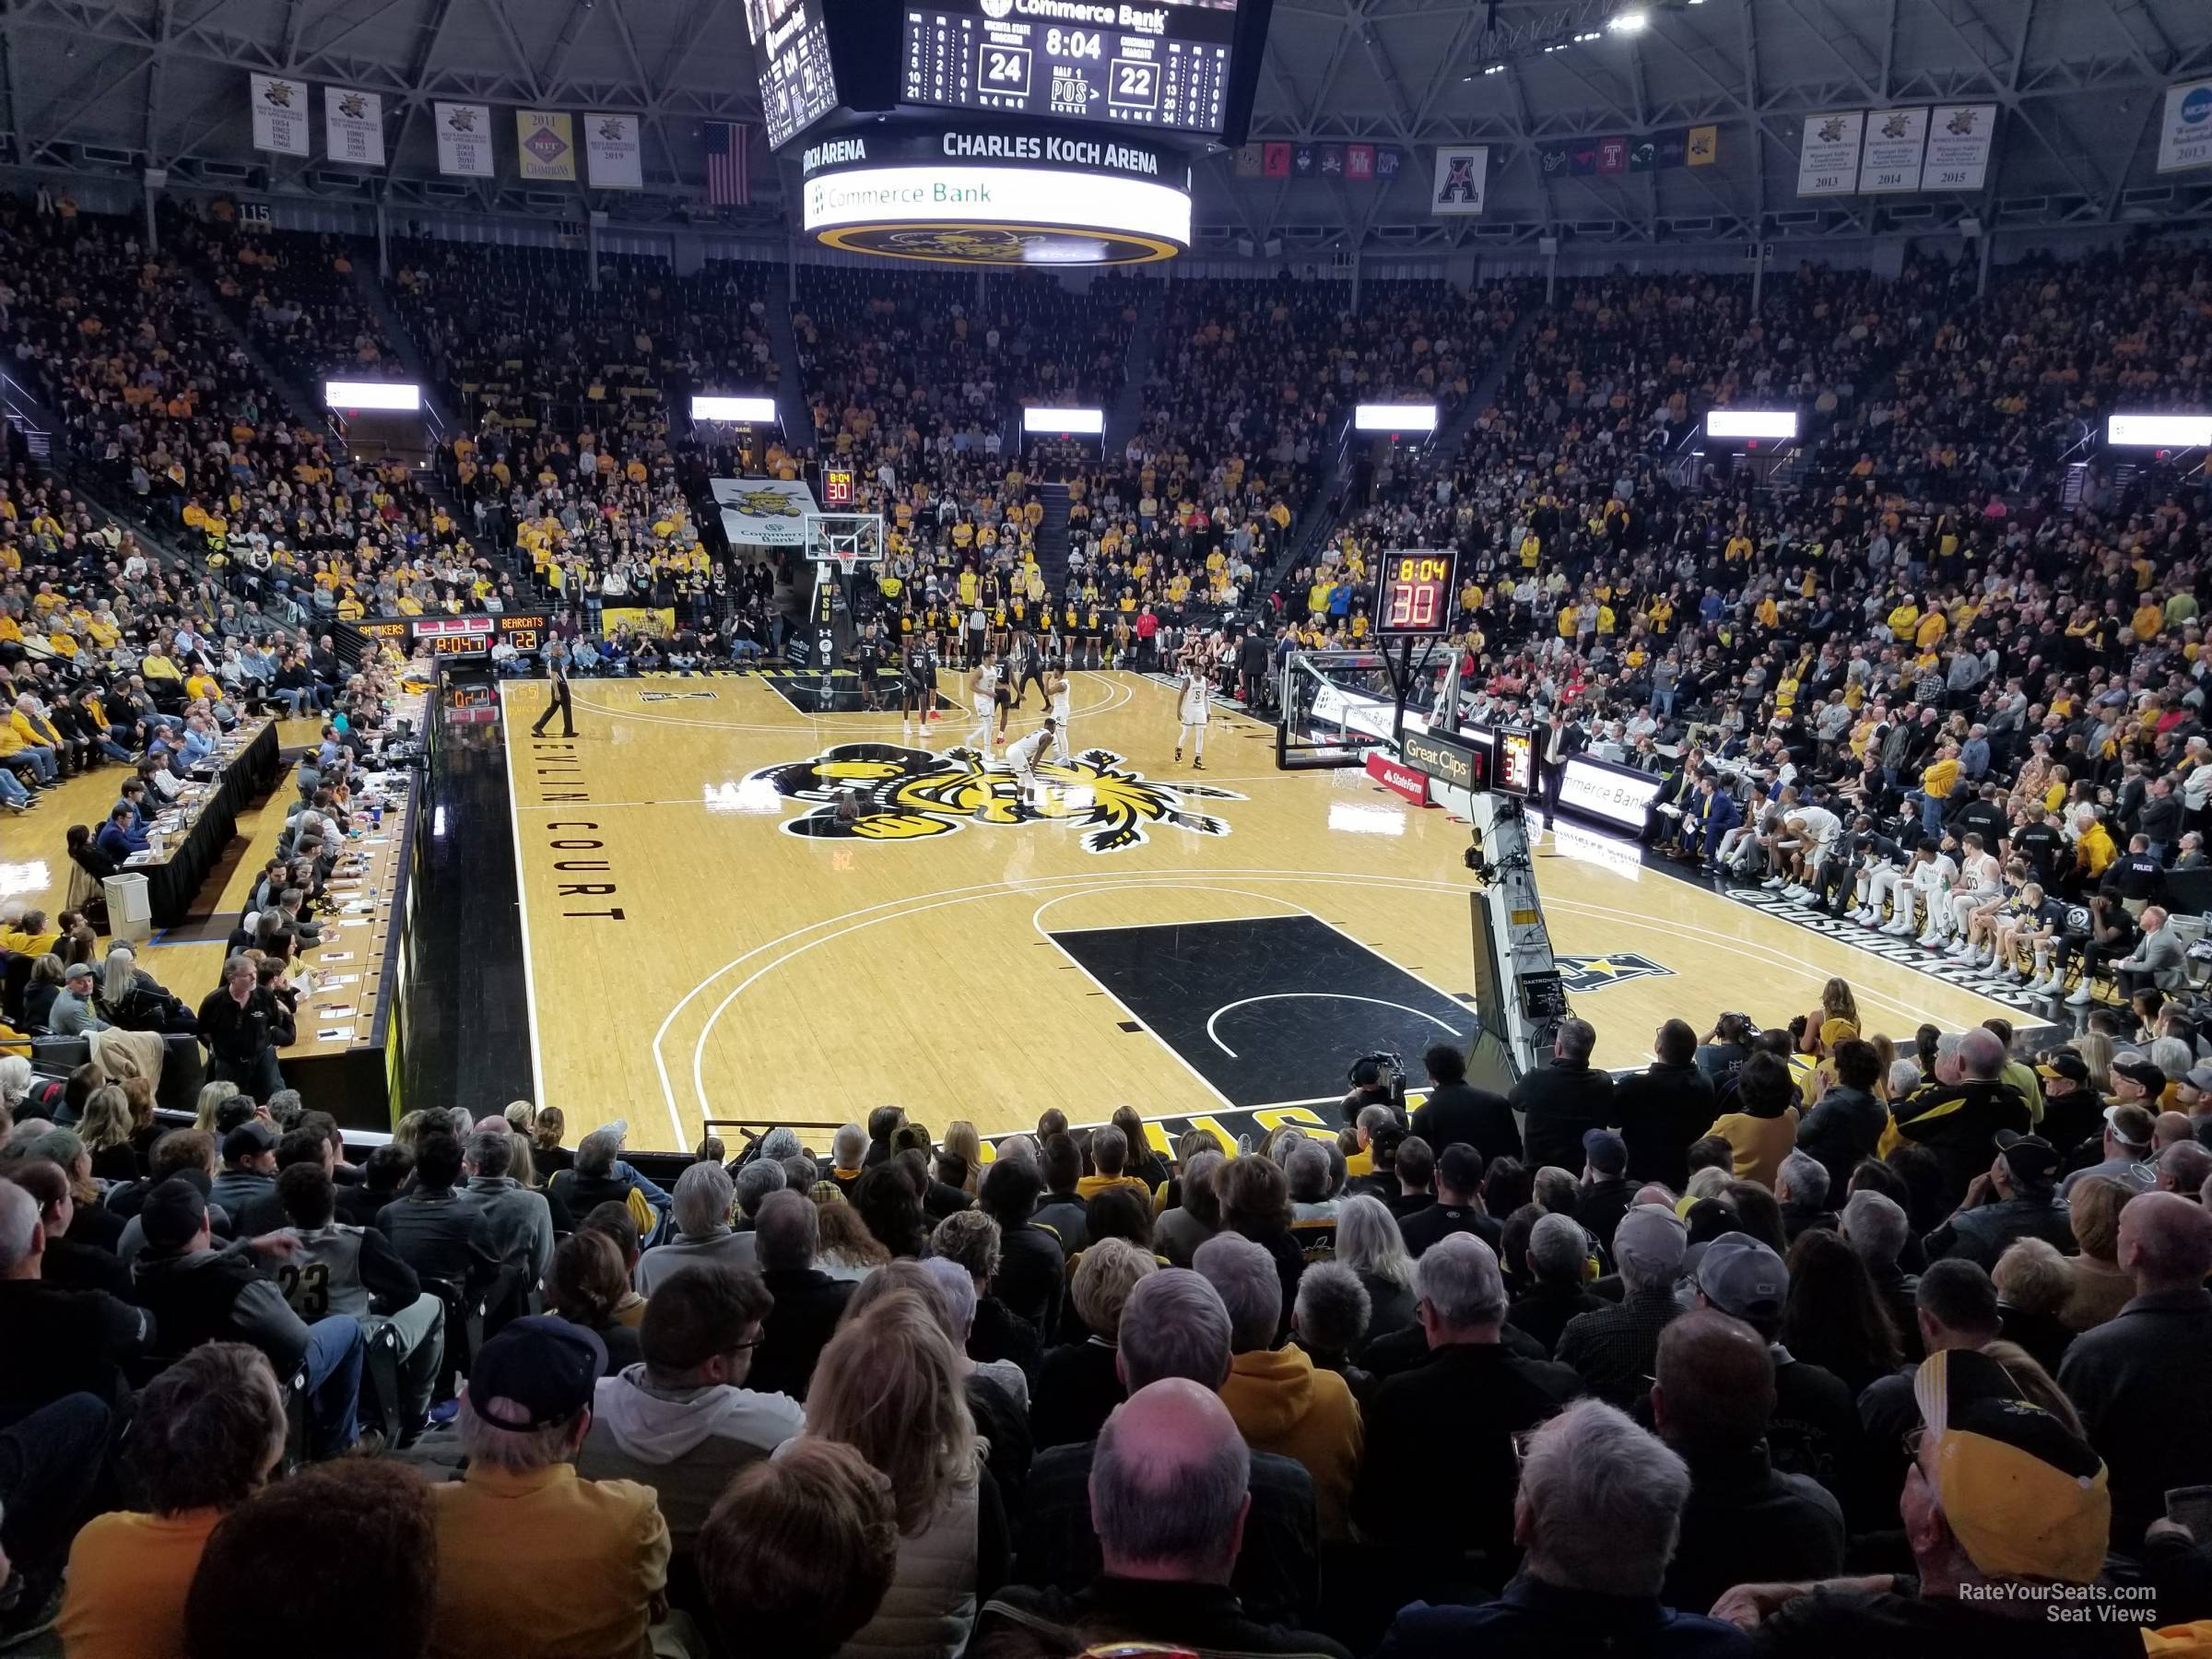 section 101, row 21 seat view  - charles koch arena